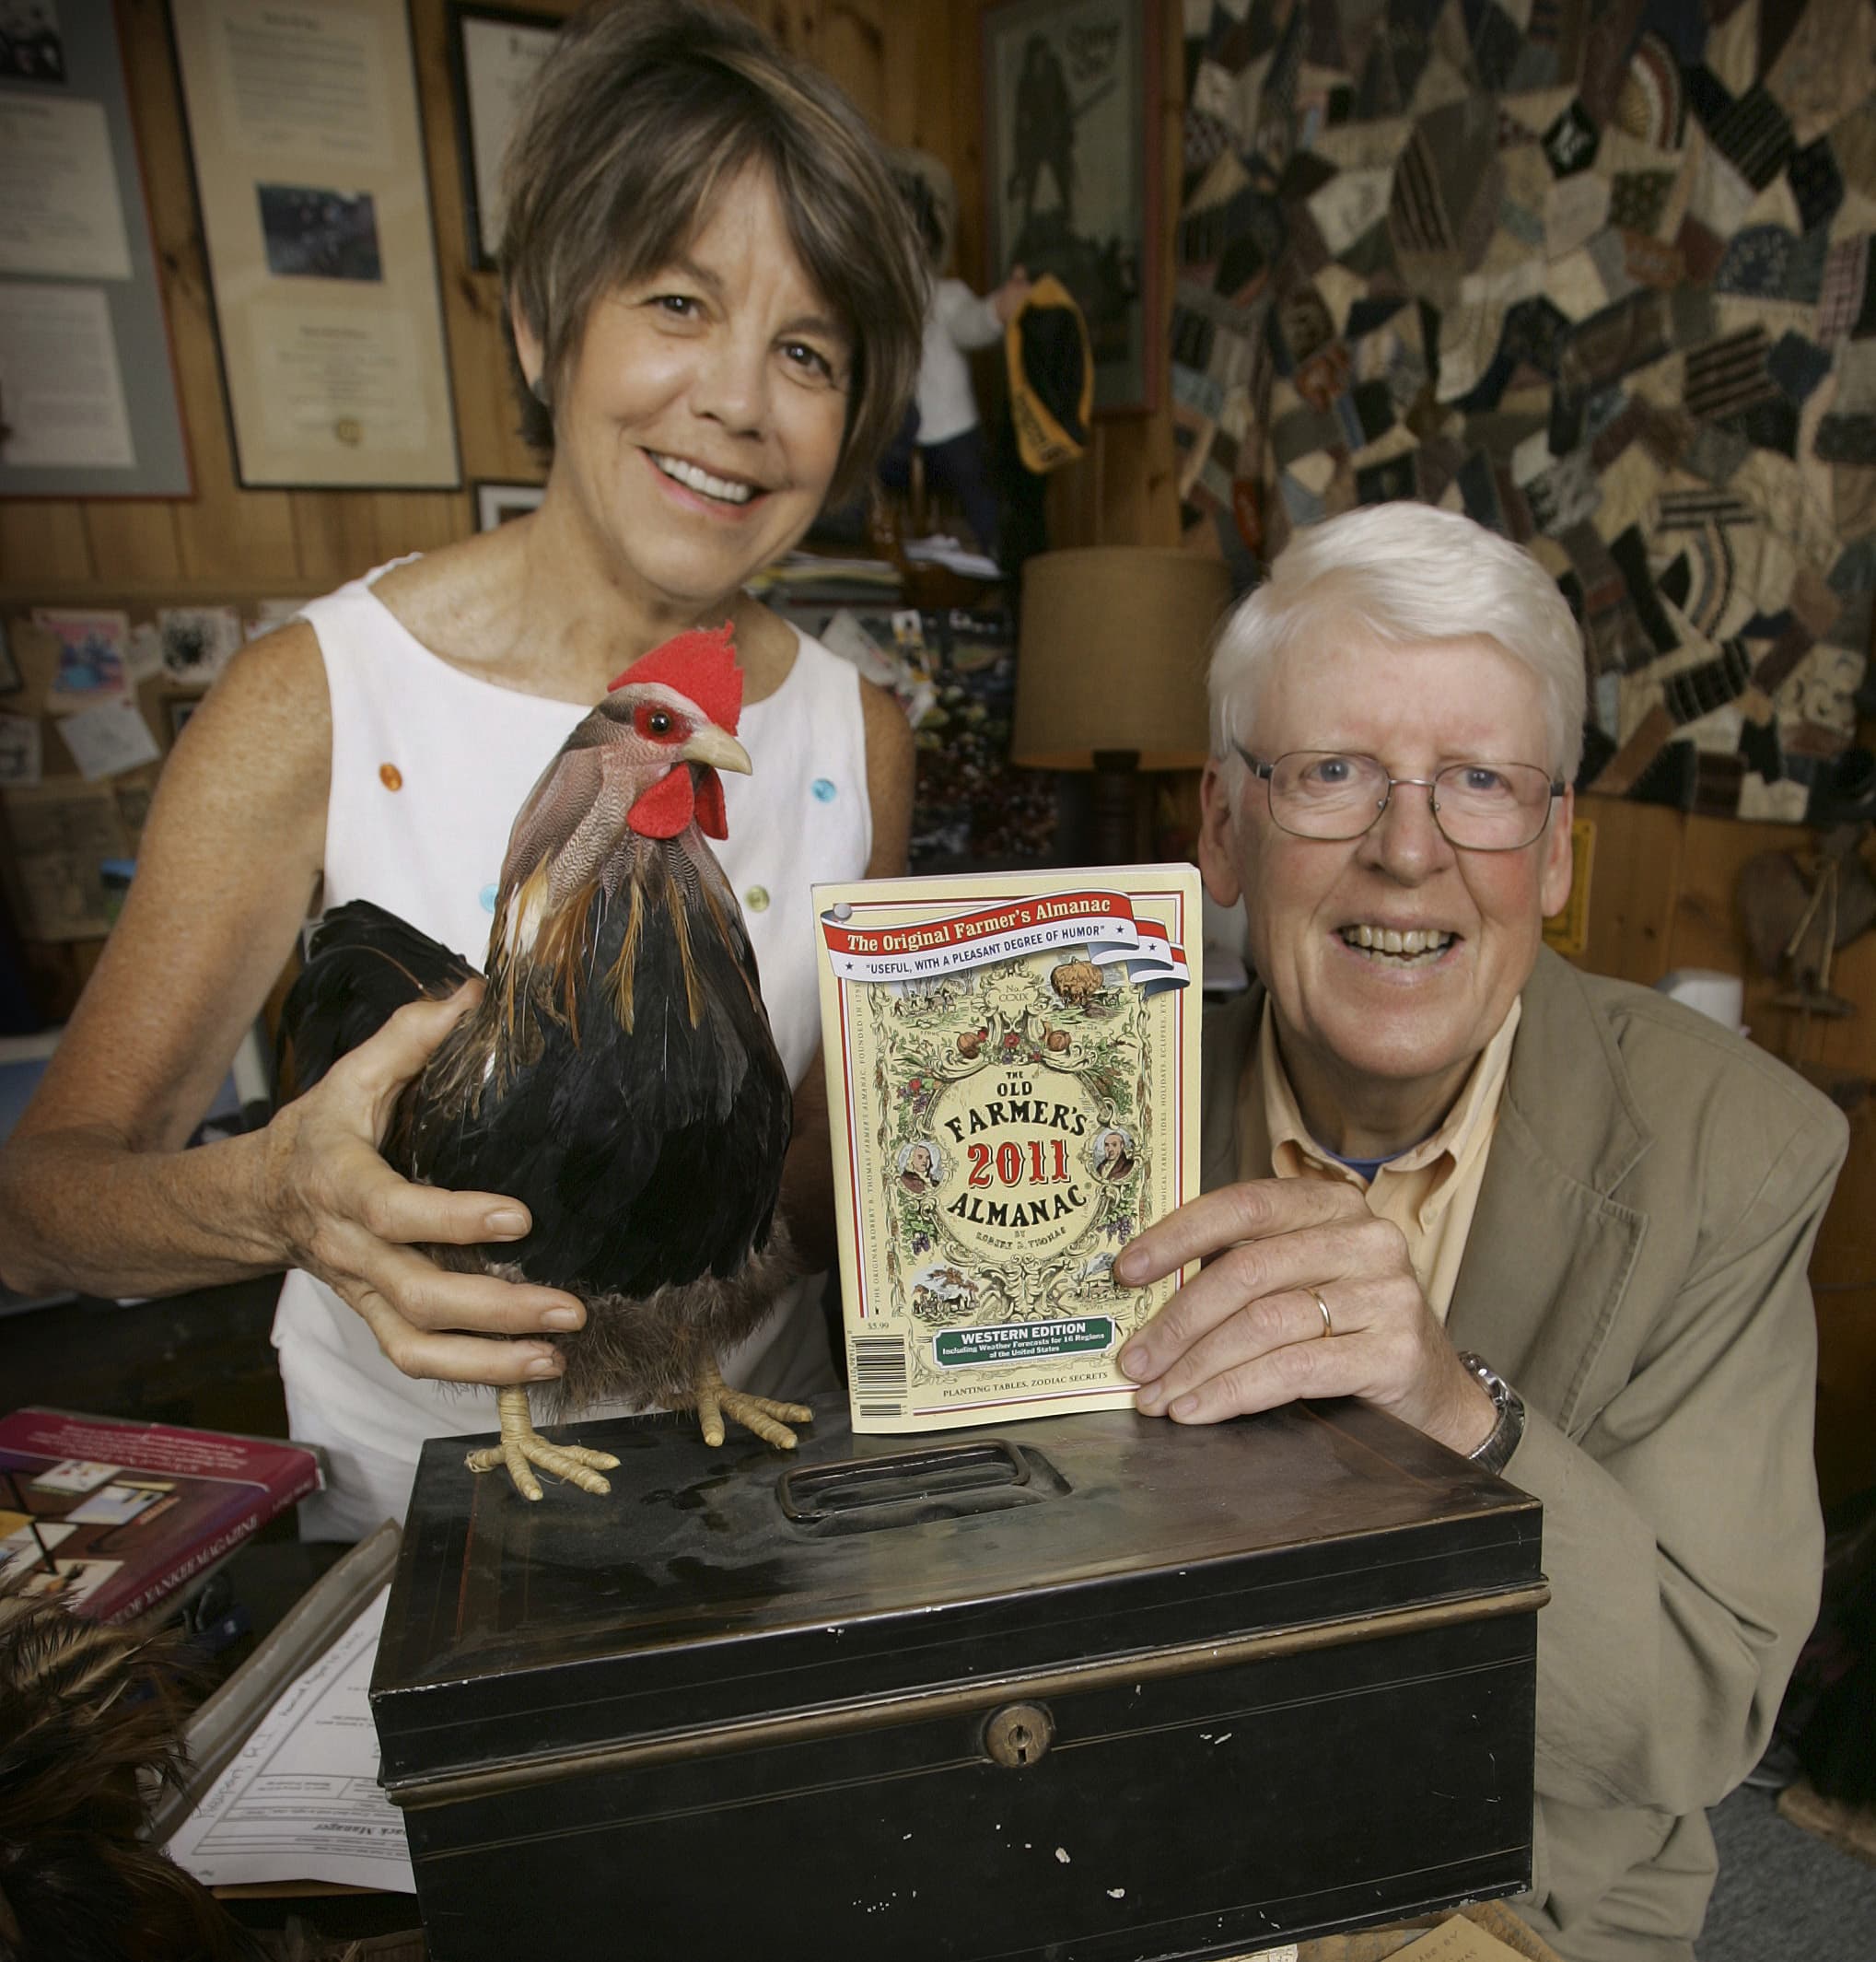 In this Sept. 1, 2010 photo, editor Janice Stillman, left, and editor-in-chief Jud Hale pose in Dublin, N.H., with the 2011 edition of the Old Farmer's Almanac on top of the lock box Hale says has the secret formula to predict weather. (Jim Cole/AP)